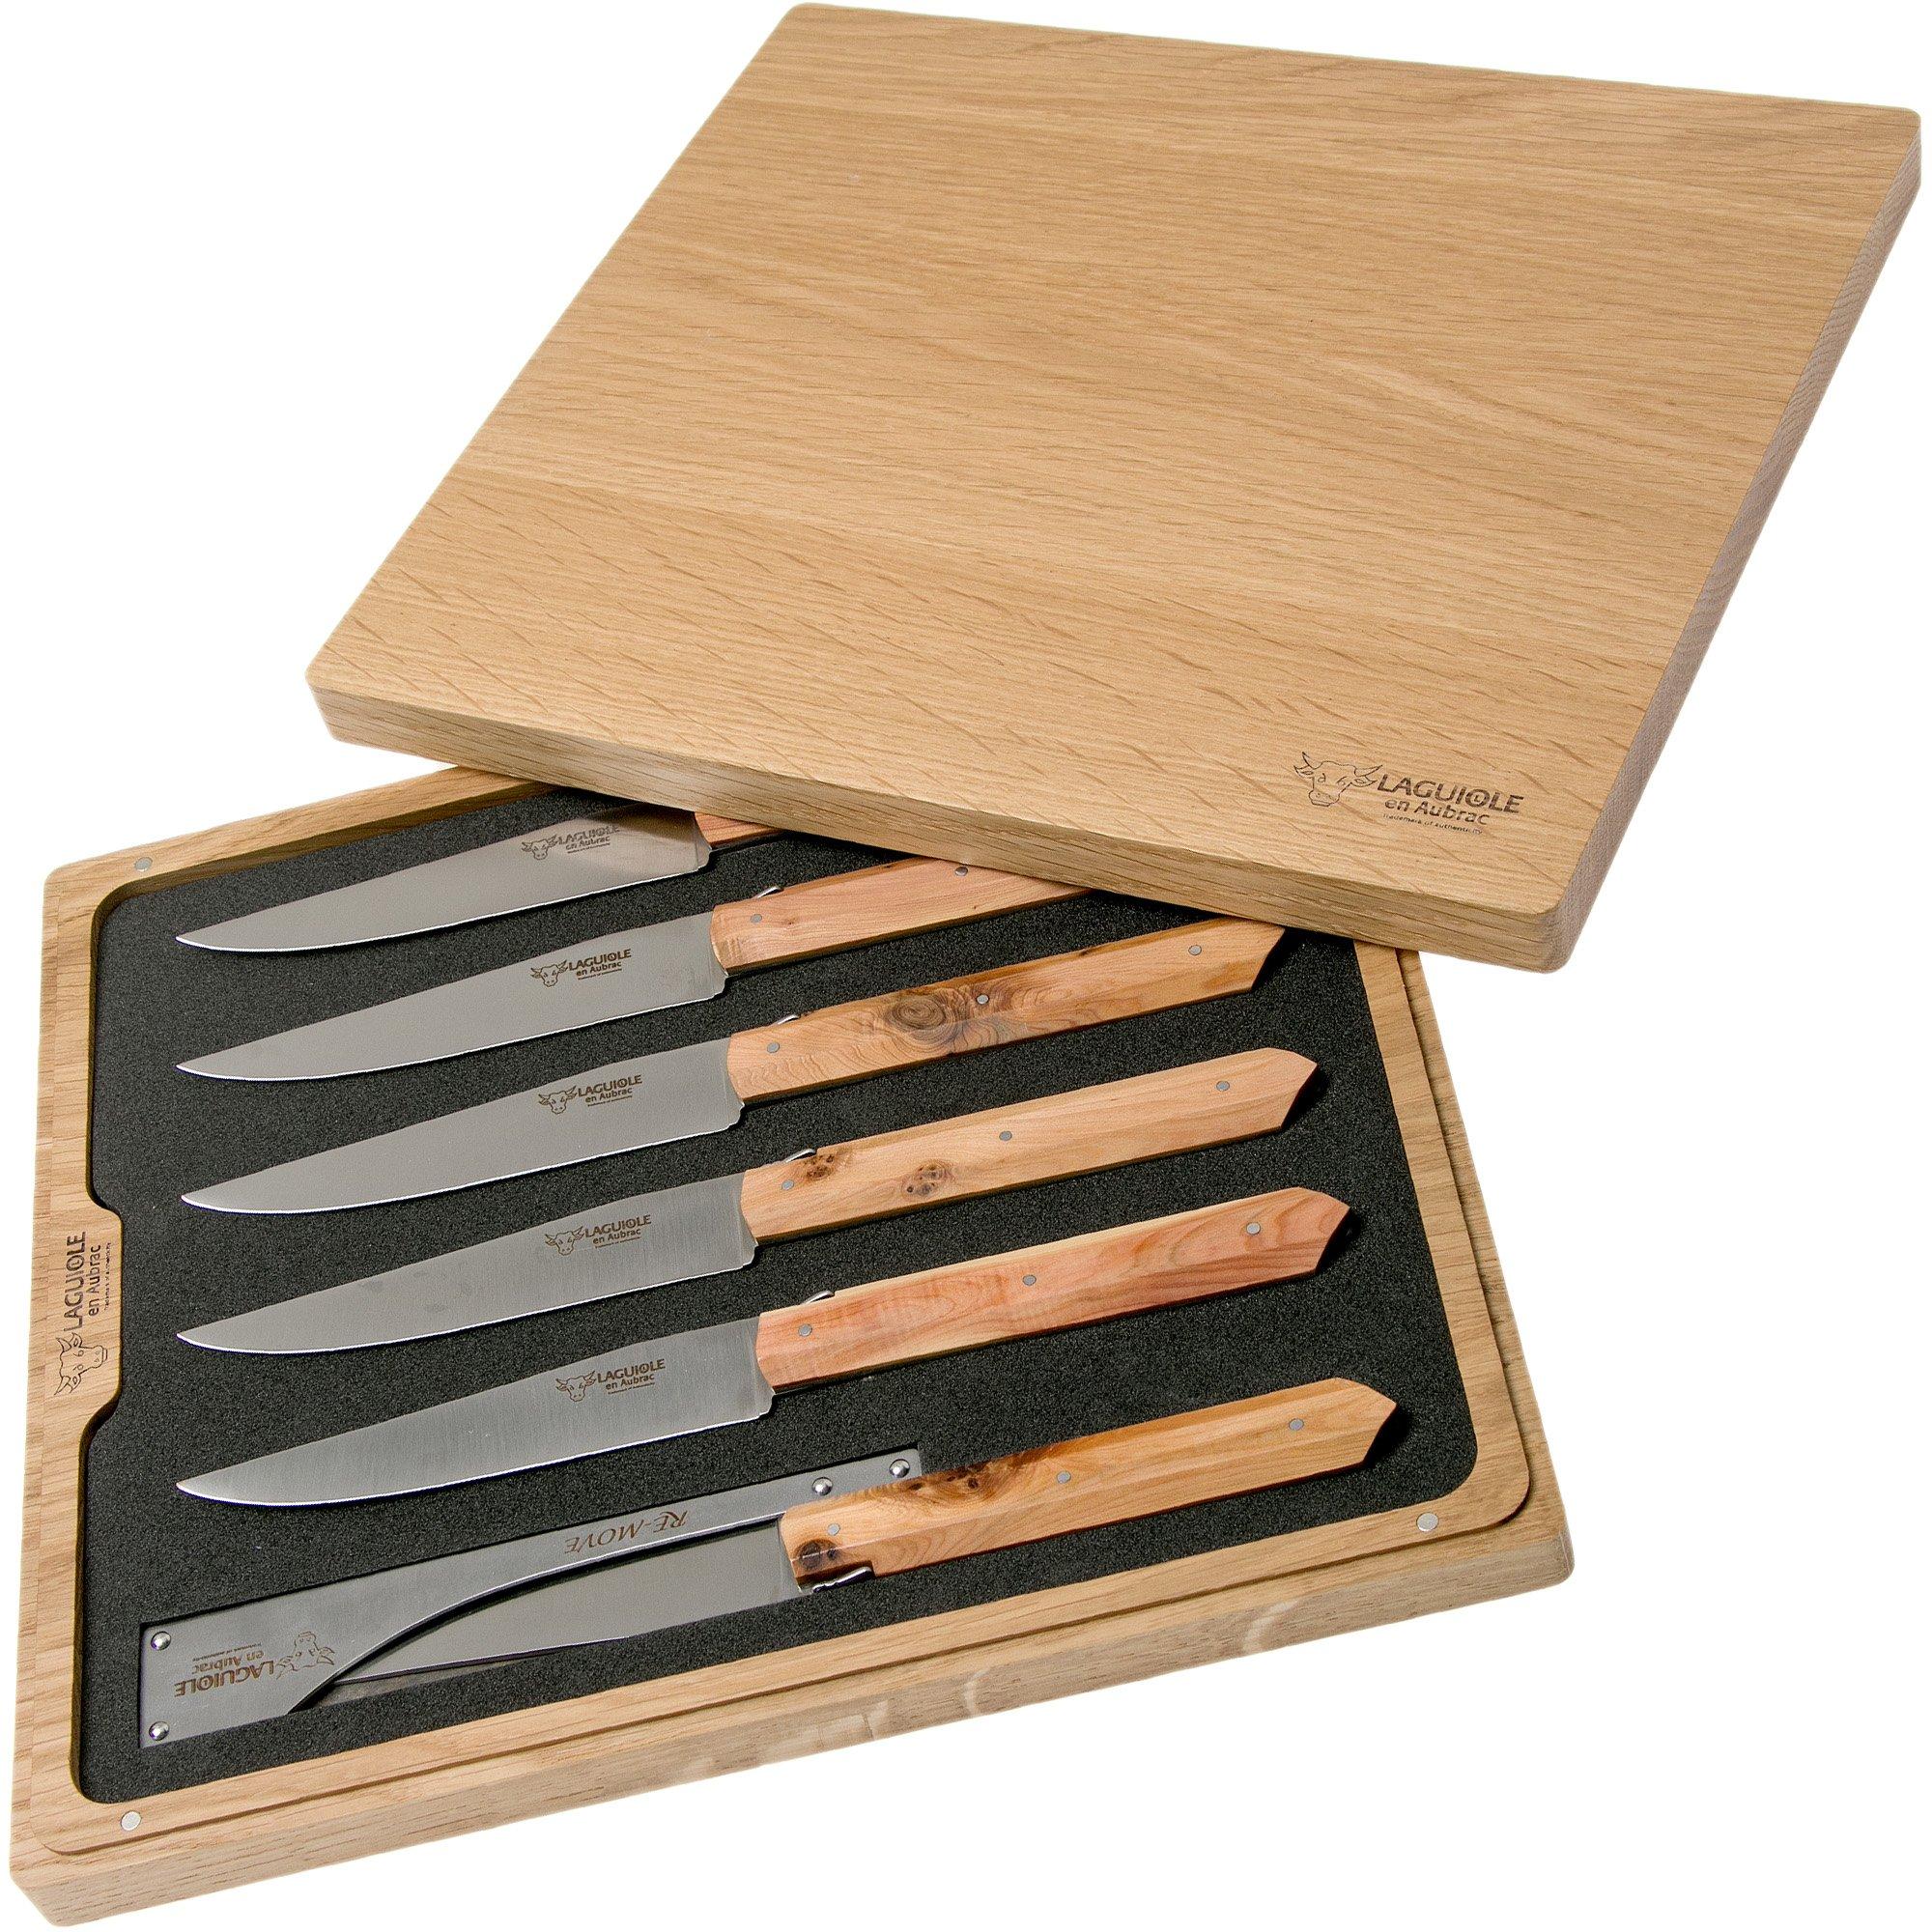 Laguiole en Aubrac kitchen knives | Tested and in stock!